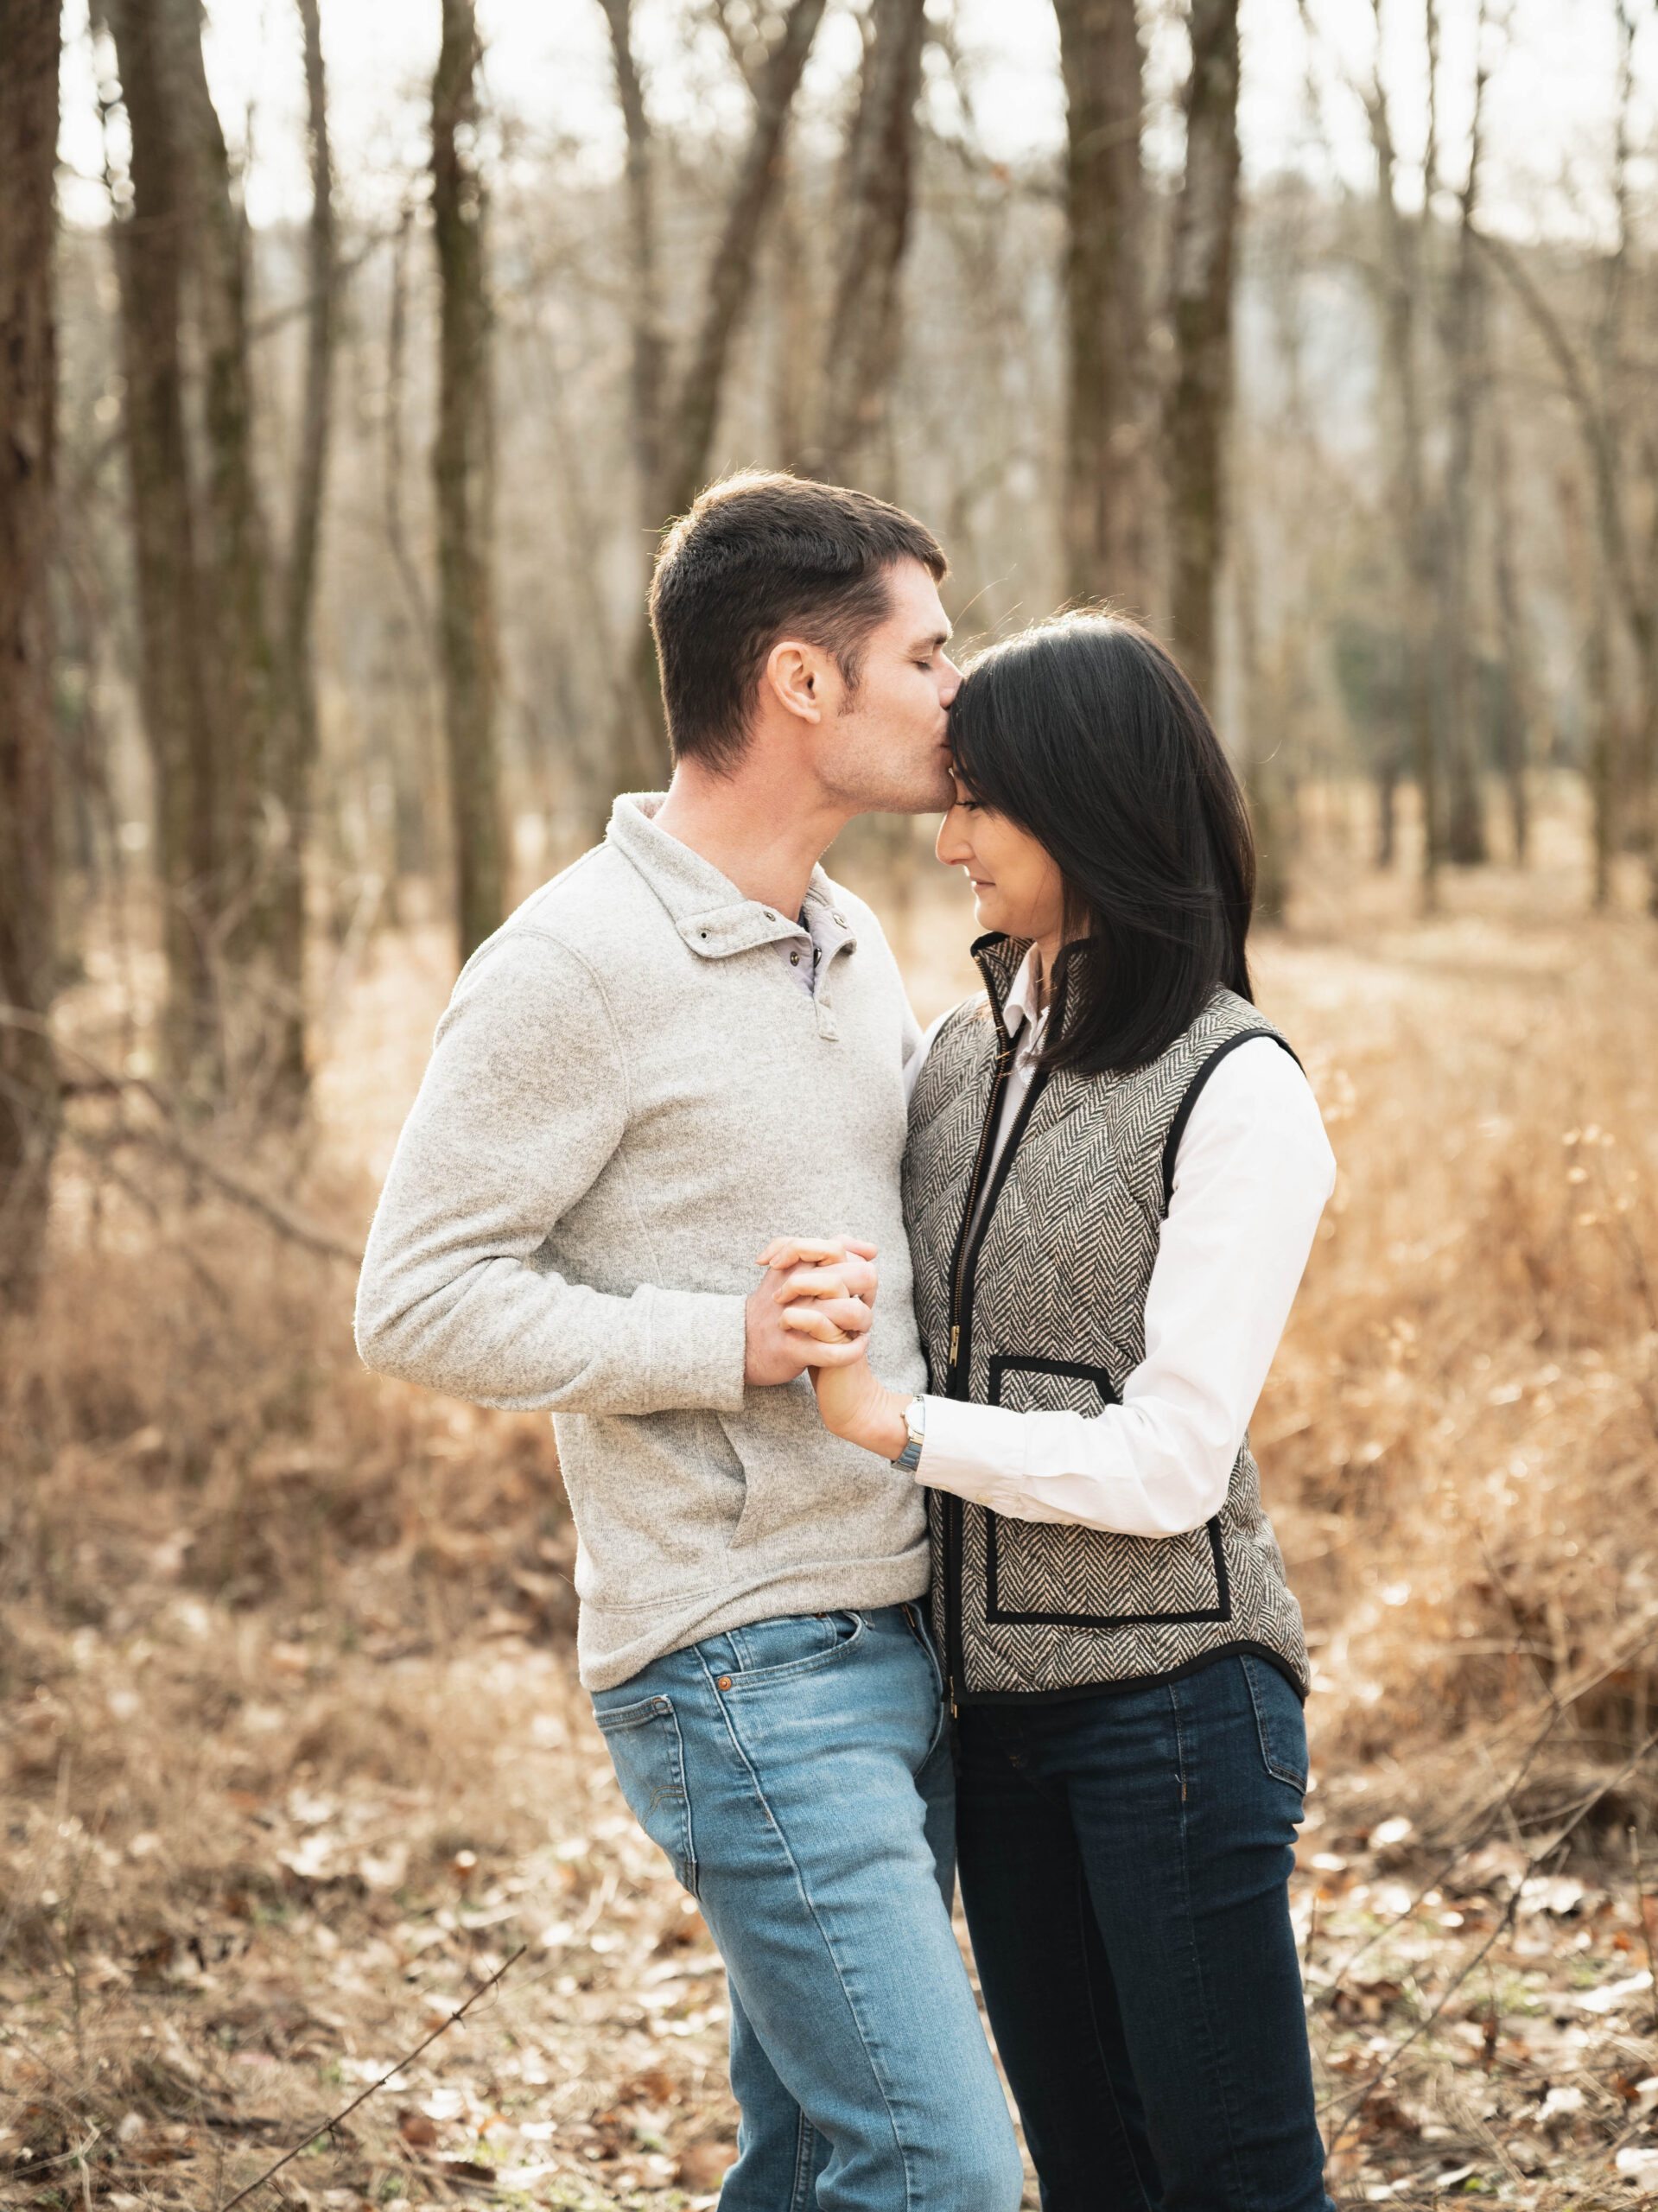 Wanting to stay warm, this couple wears sweaters and vests during their engagement session.